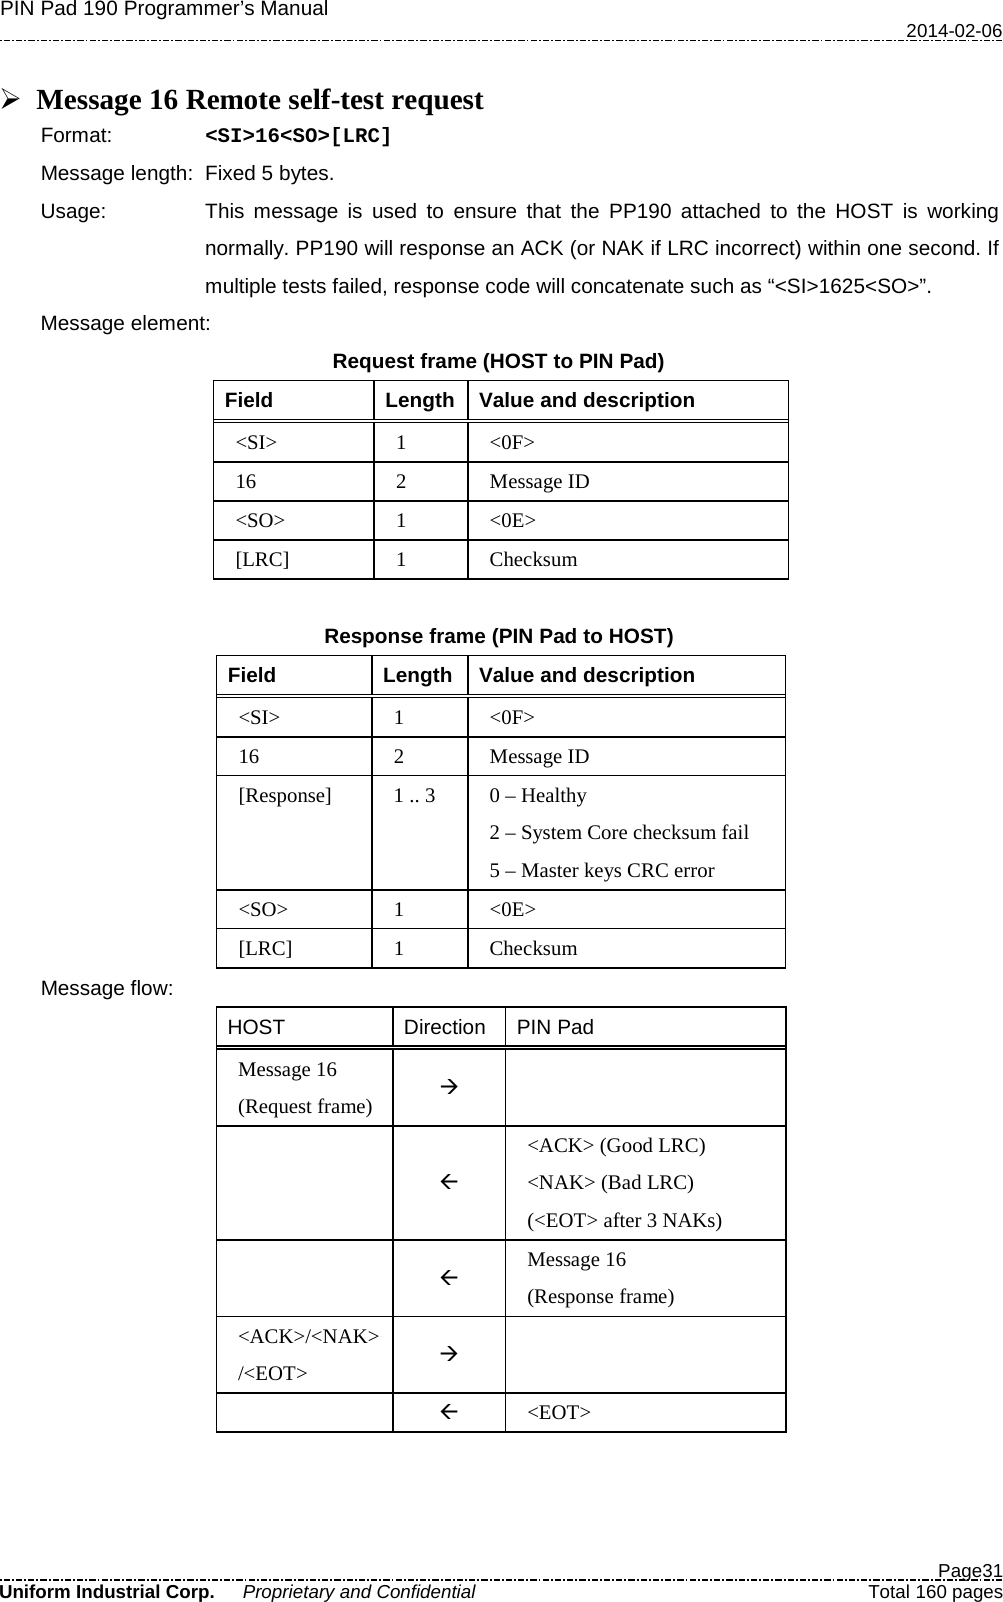 PIN Pad 190 Programmer’s Manual   2014-02-06  Page31 Uniform Industrial Corp. Proprietary and Confidential  Total 160 pages   Message 16 Remote self-test request Format:   &lt;SI&gt;16&lt;SO&gt;[LRC] Message length: Fixed 5 bytes. Usage: This message is used to ensure that the PP190 attached to the HOST is working normally. PP190 will response an ACK (or NAK if LRC incorrect) within one second. If multiple tests failed, response code will concatenate such as “&lt;SI&gt;1625&lt;SO&gt;”. Message element: Request frame (HOST to PIN Pad) Field  Length  Value and description &lt;SI&gt;  1  &lt;0F&gt; 16  2  Message ID &lt;SO&gt;  1  &lt;0E&gt; [LRC]  1  Checksum  Response frame (PIN Pad to HOST) Field  Length  Value and description &lt;SI&gt;  1  &lt;0F&gt; 16  2  Message ID [Response]  1 .. 3 0 – Healthy 2 – System Core checksum fail 5 – Master keys CRC error &lt;SO&gt;  1  &lt;0E&gt; [LRC]  1  Checksum Message flow: HOST Direction PIN Pad Message 16 (Request frame)     &lt;ACK&gt; (Good LRC) &lt;NAK&gt; (Bad LRC) (&lt;EOT&gt; after 3 NAKs)   Message 16 (Response frame) &lt;ACK&gt;/&lt;NAK&gt;/&lt;EOT&gt;     &lt;EOT&gt; 